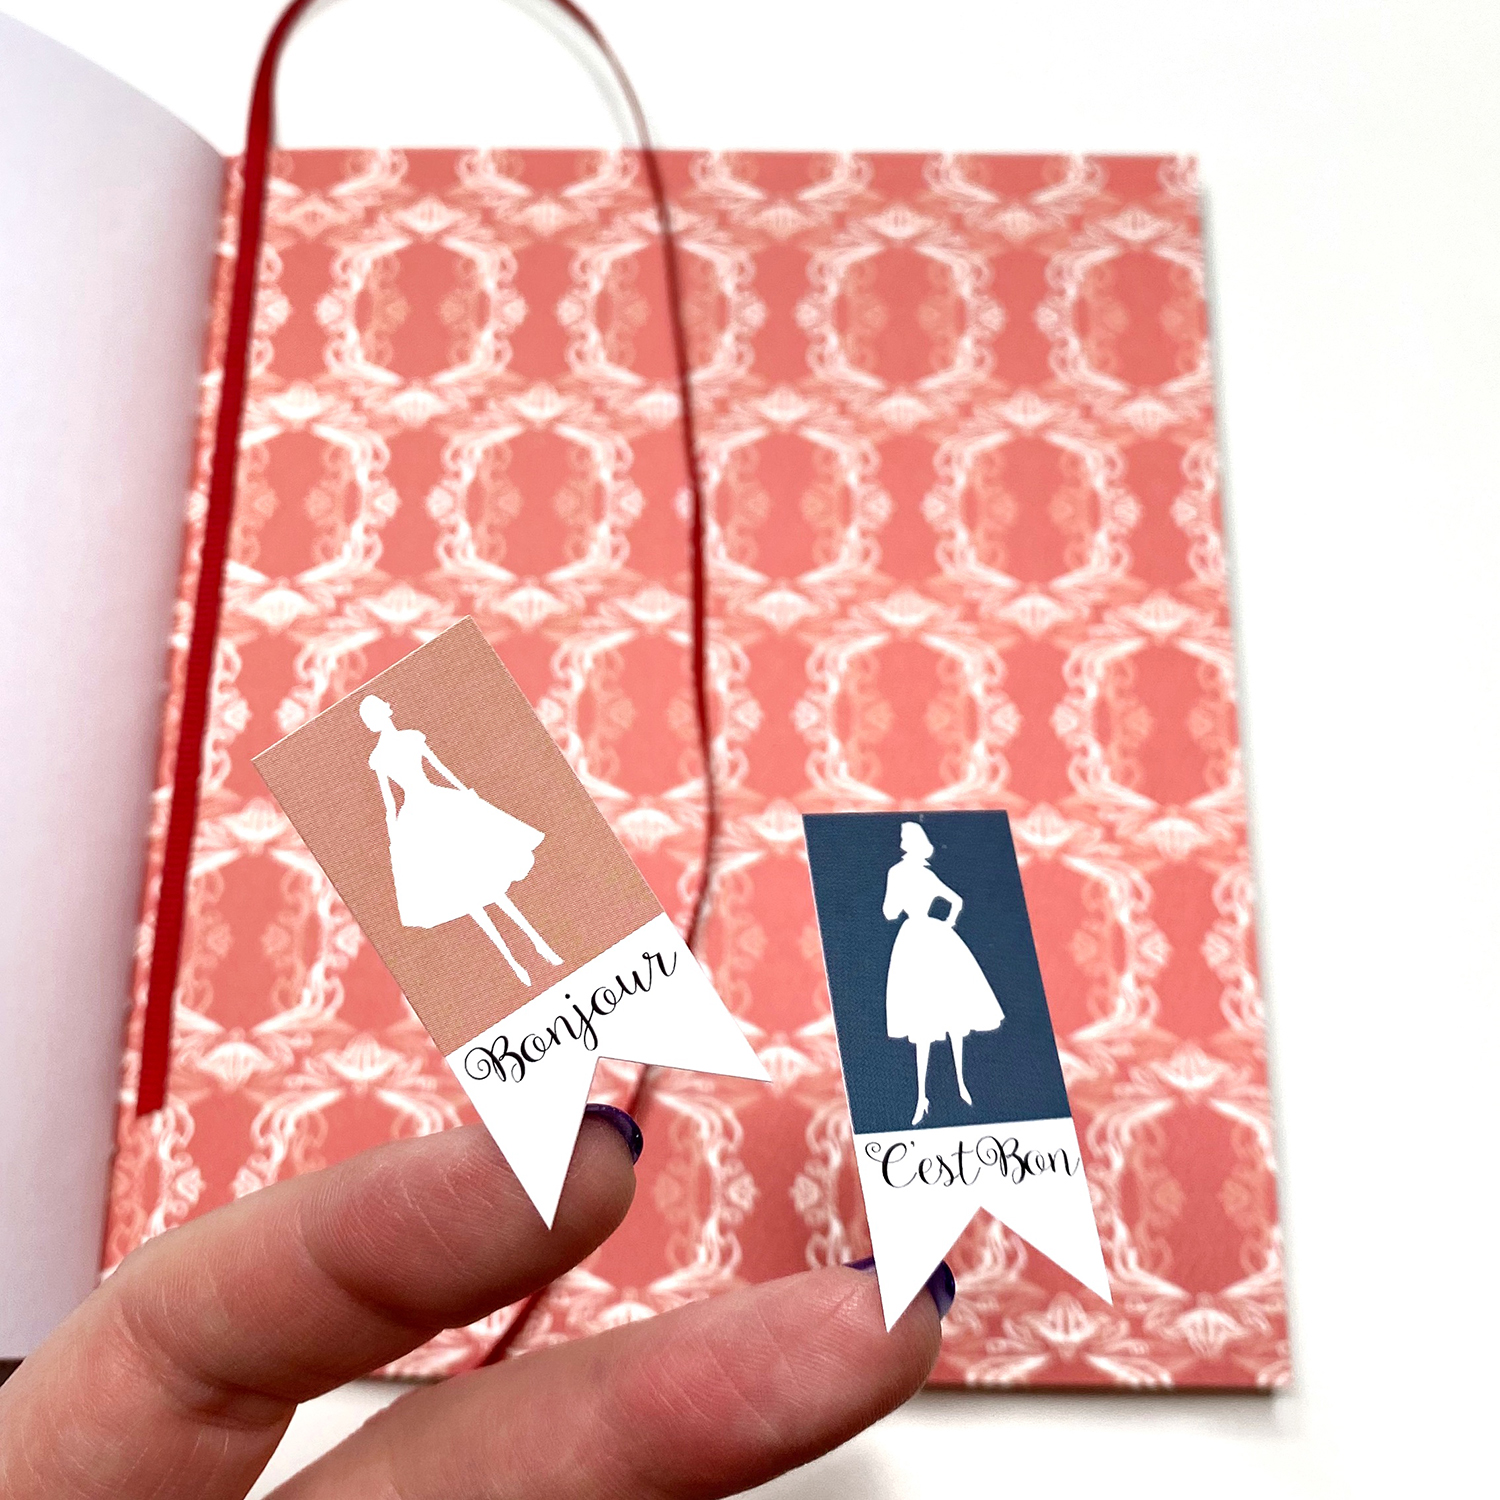 Make Your Own Notebook Using Scrapbook Paper by Jessica Mack on behalf of Tombow